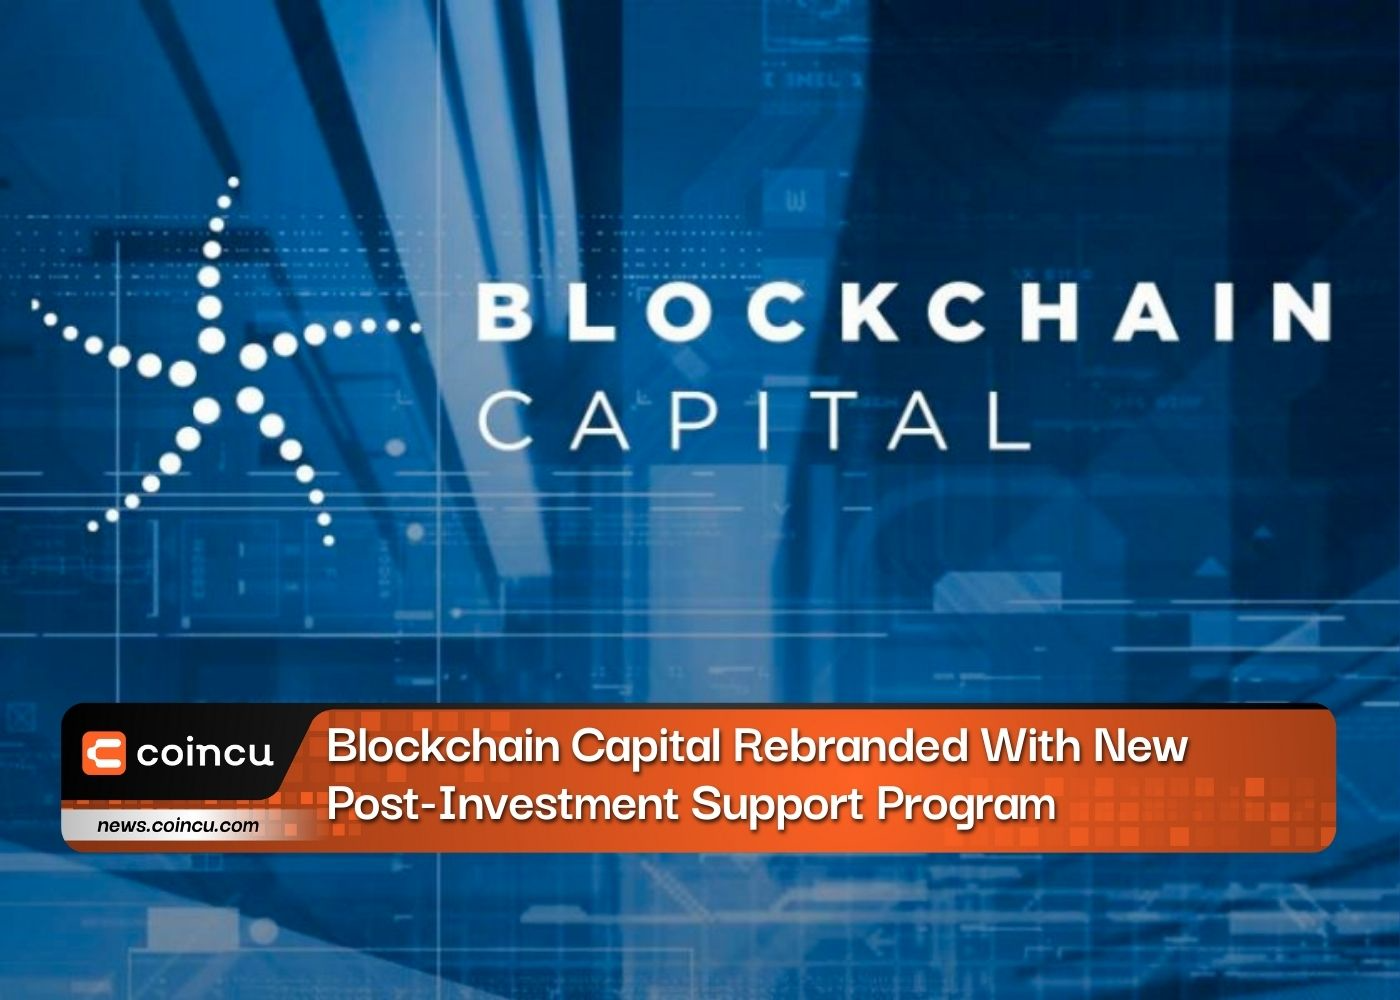 Blockchain Capital Rebranded With New Post-Investment Support Program